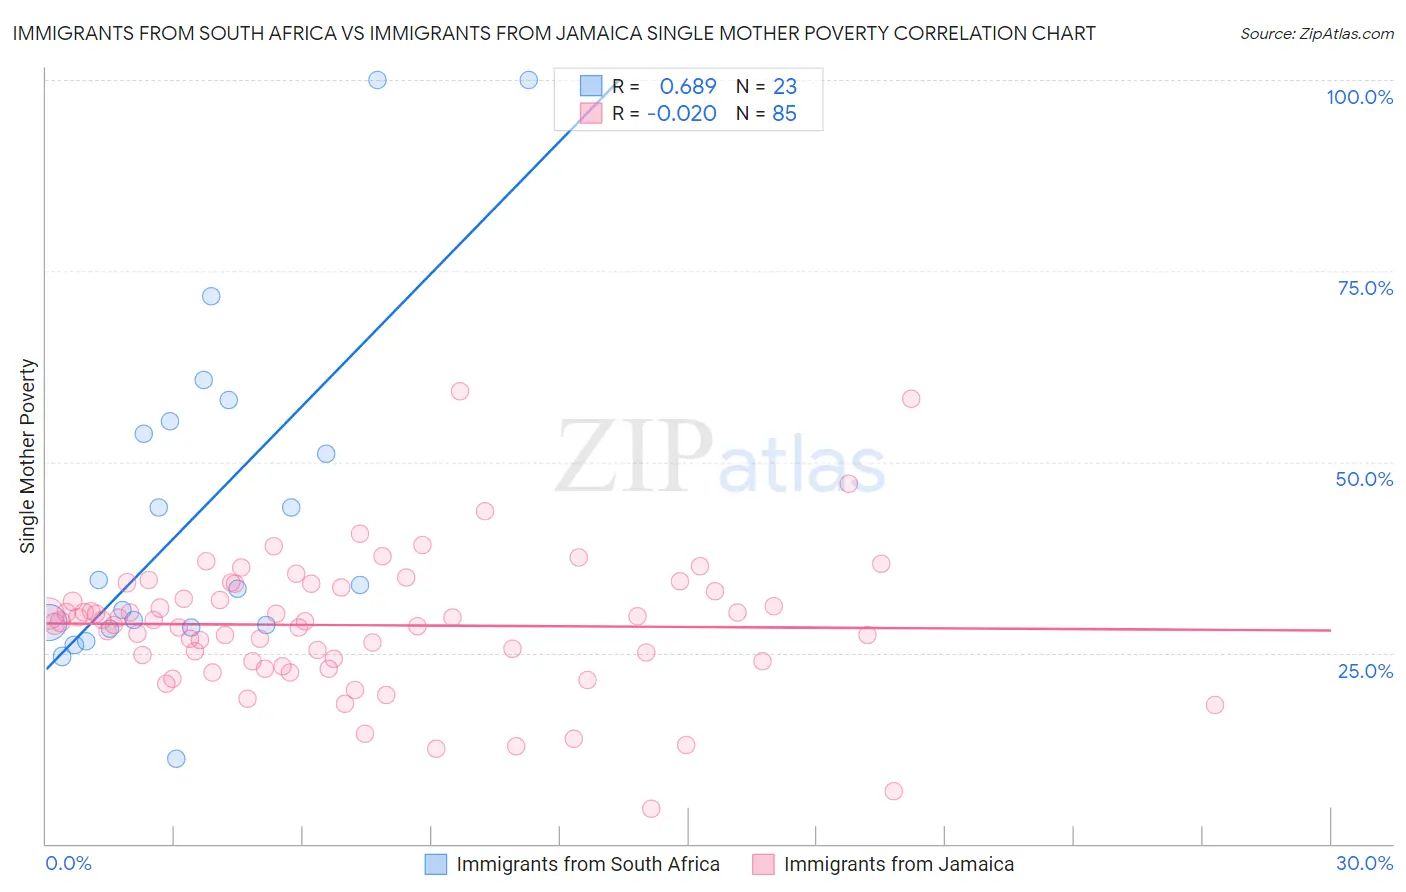 Immigrants from South Africa vs Immigrants from Jamaica Single Mother Poverty